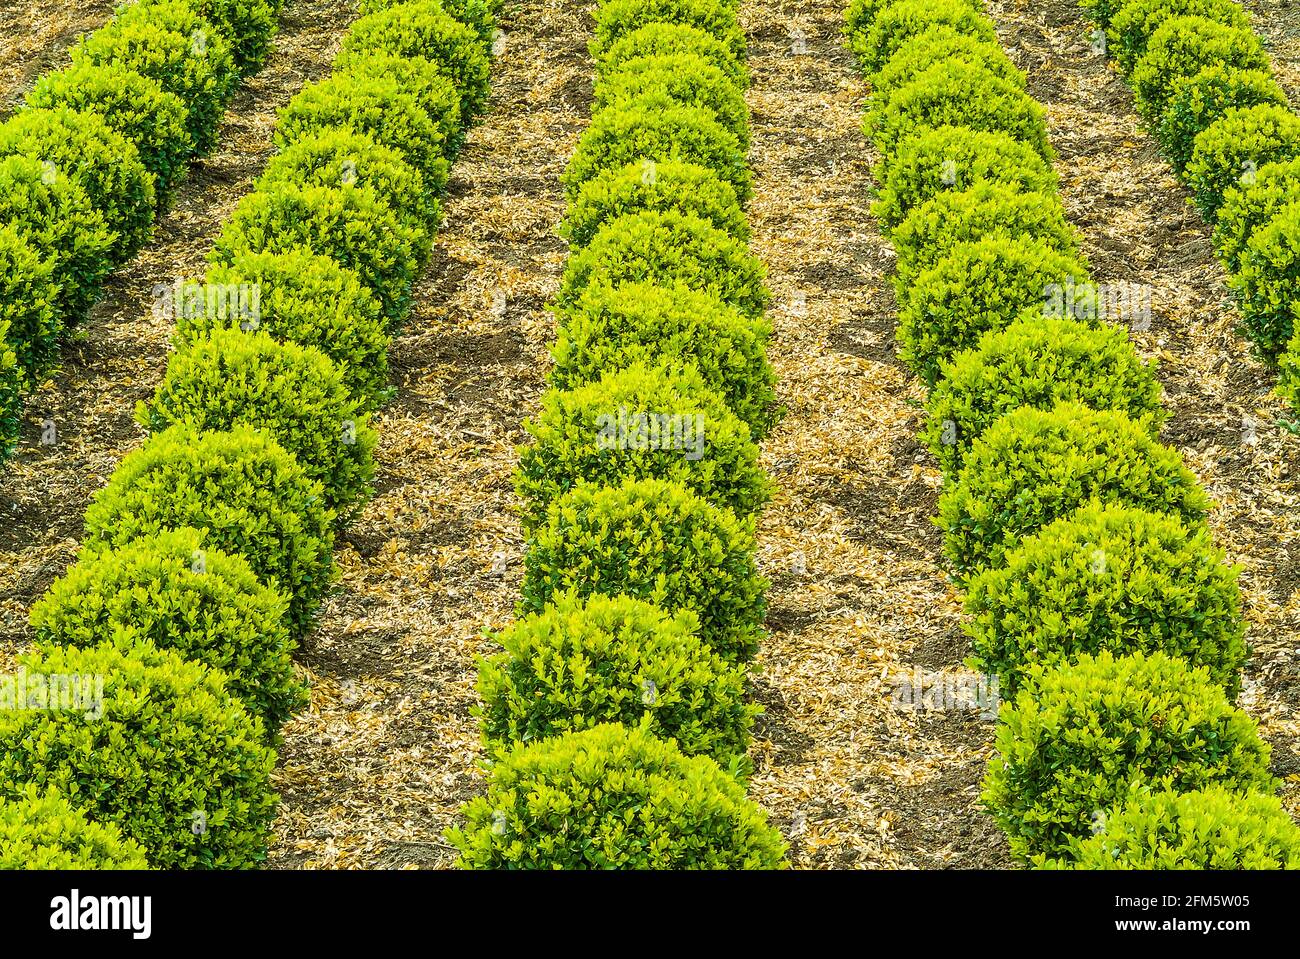 Industrial growth of green sculpted round buxus trees Stock Photo